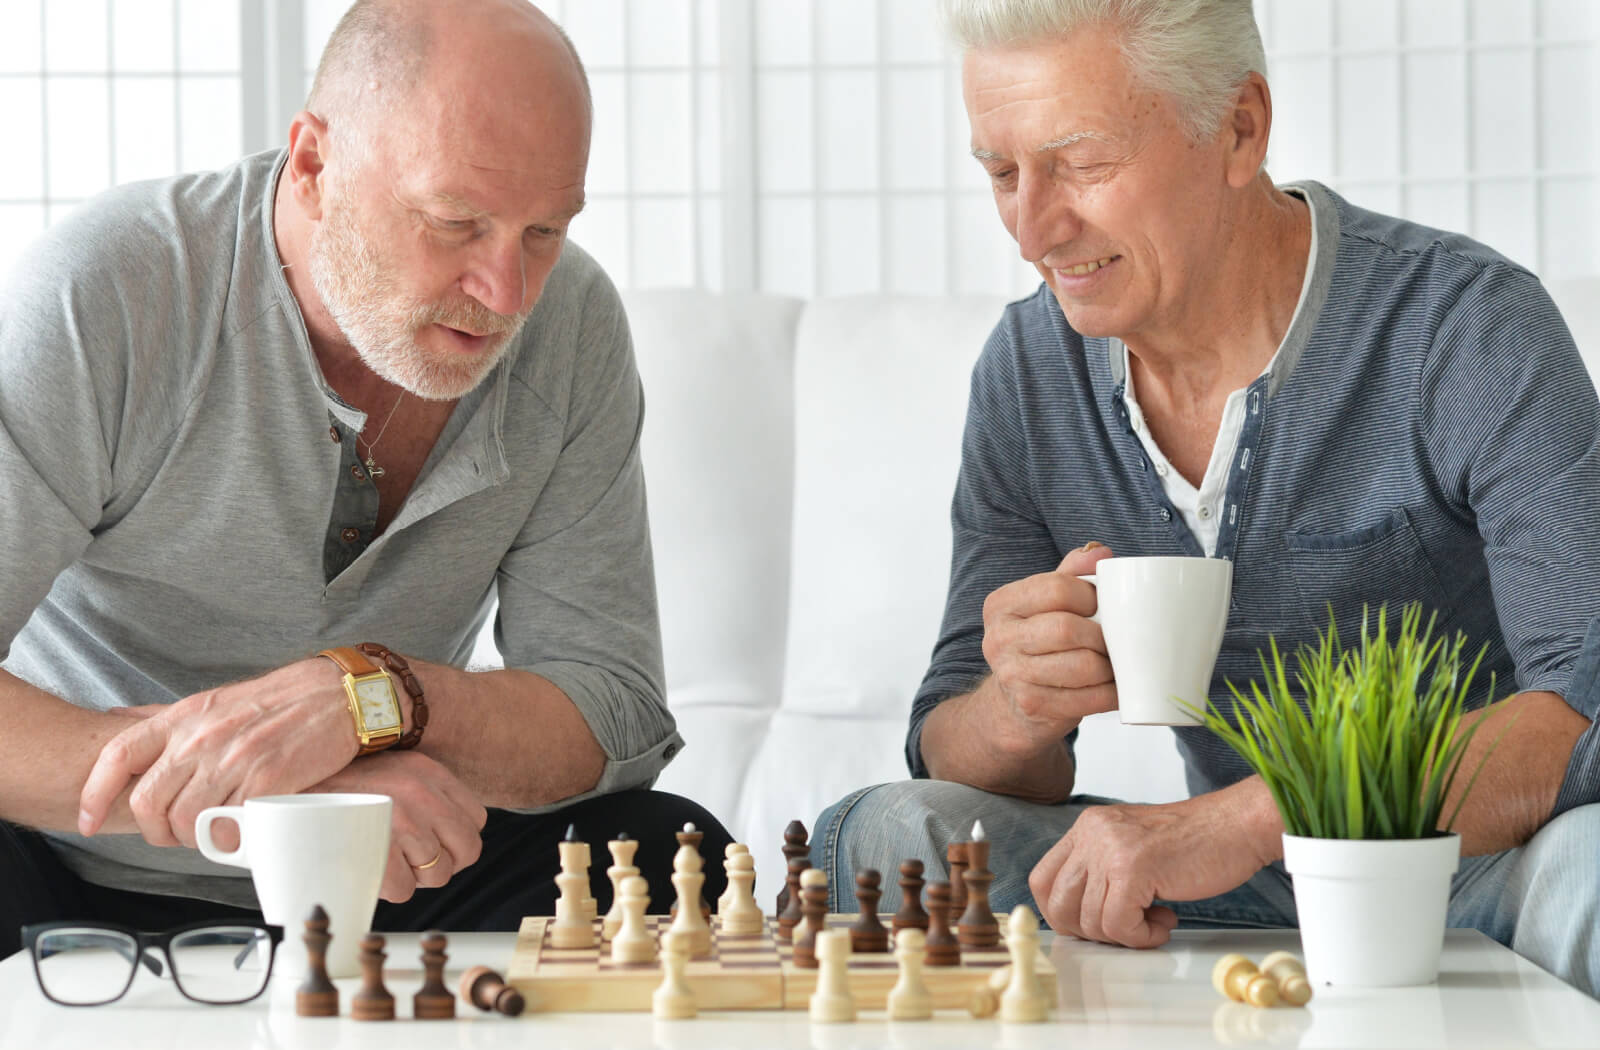 Two seniors playing chess while enjoying a cup of coffee in a brightly lit room.